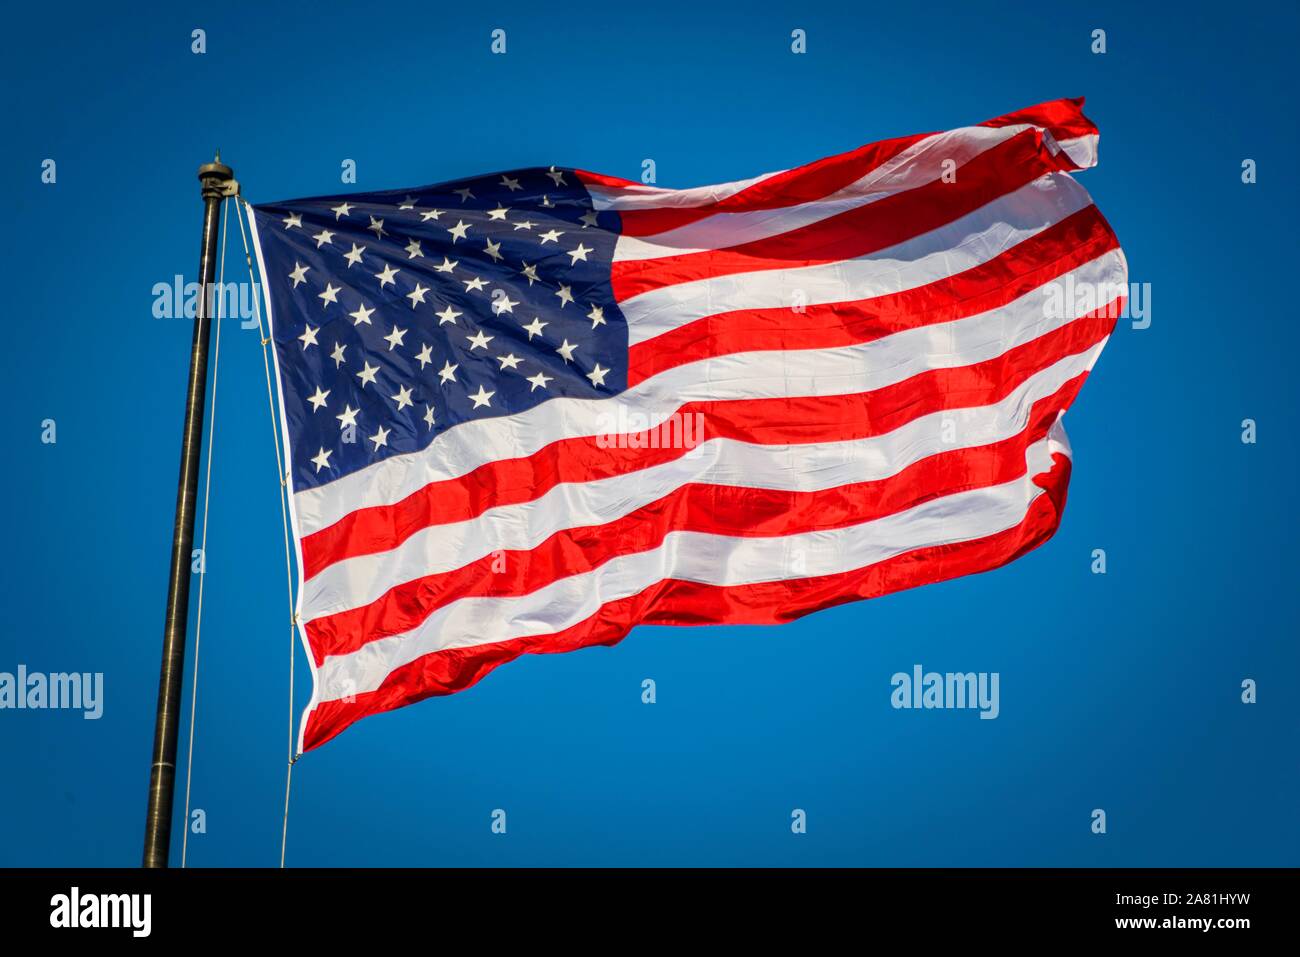 American flag, national flag, US-American flag blowing in the wind against a blue sky, USA Stock Photo